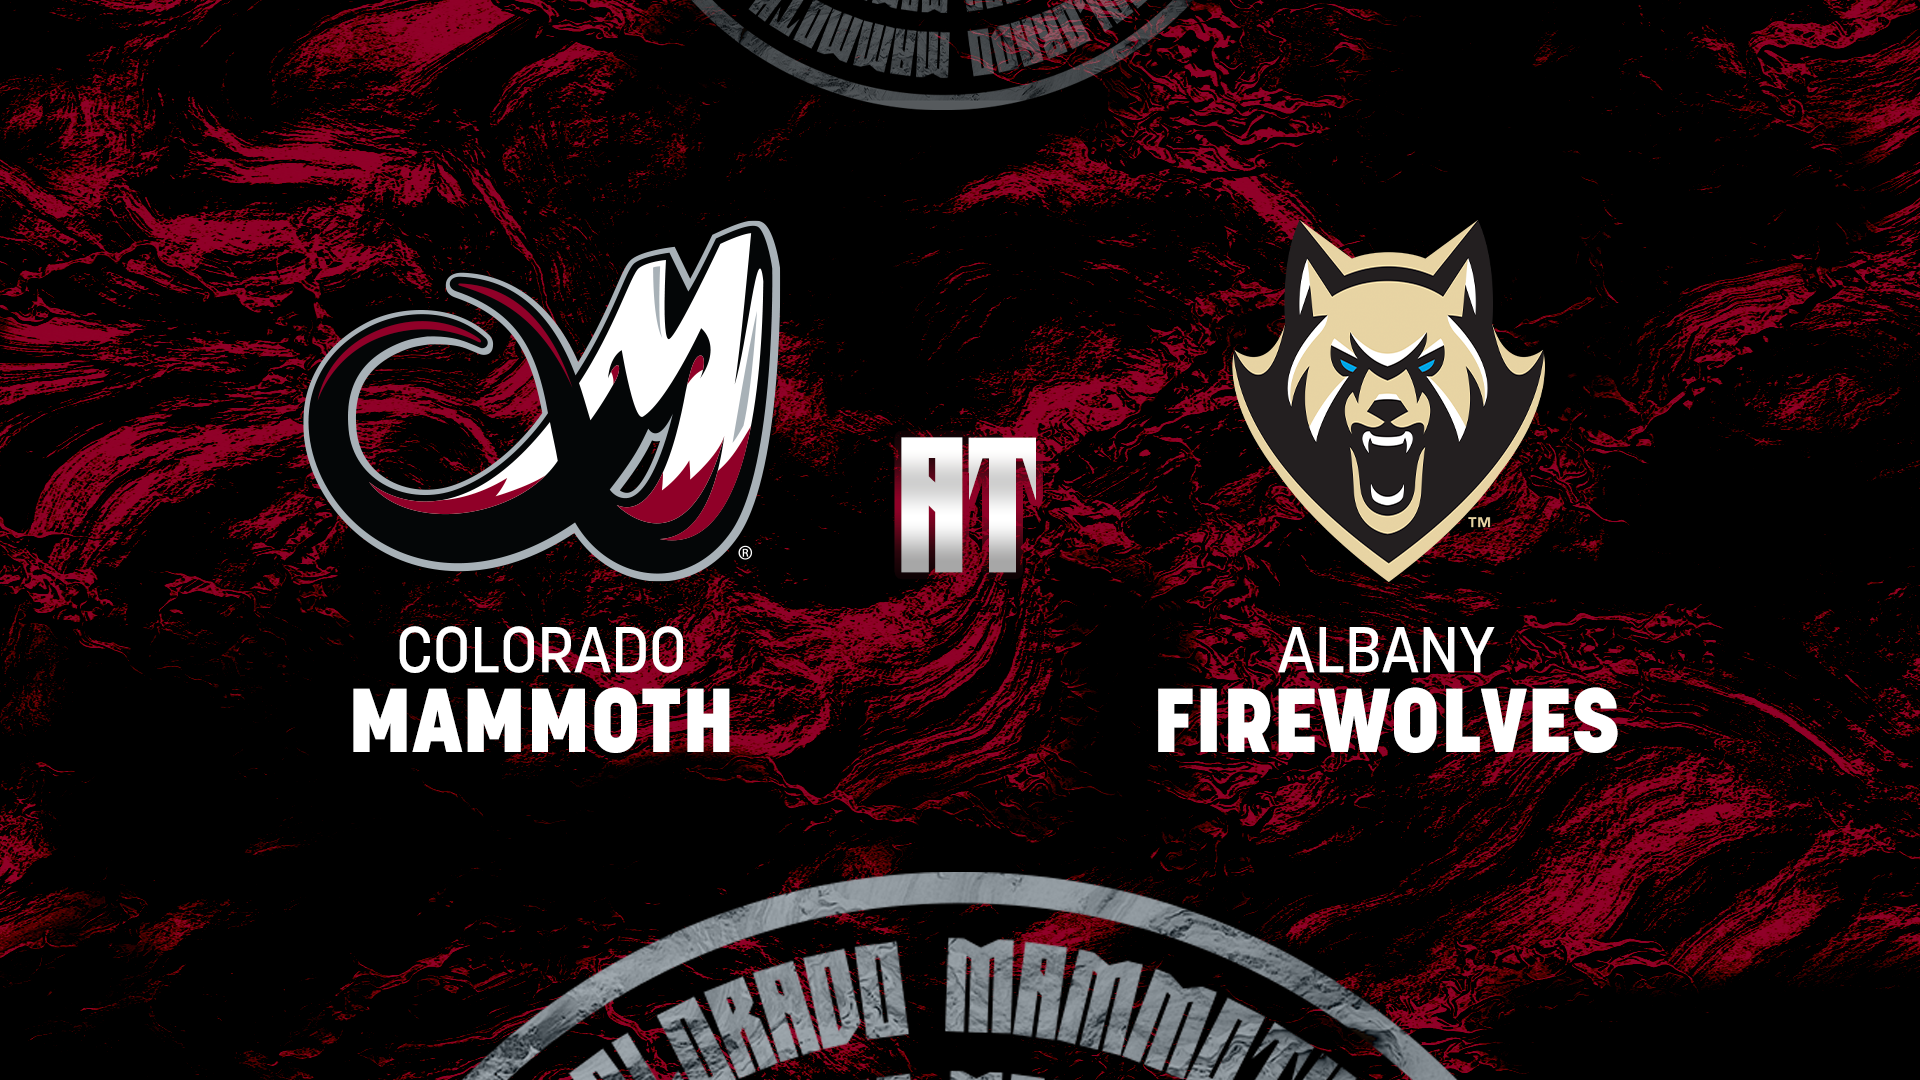 Mammoth vs. Firewolves matchup graphic